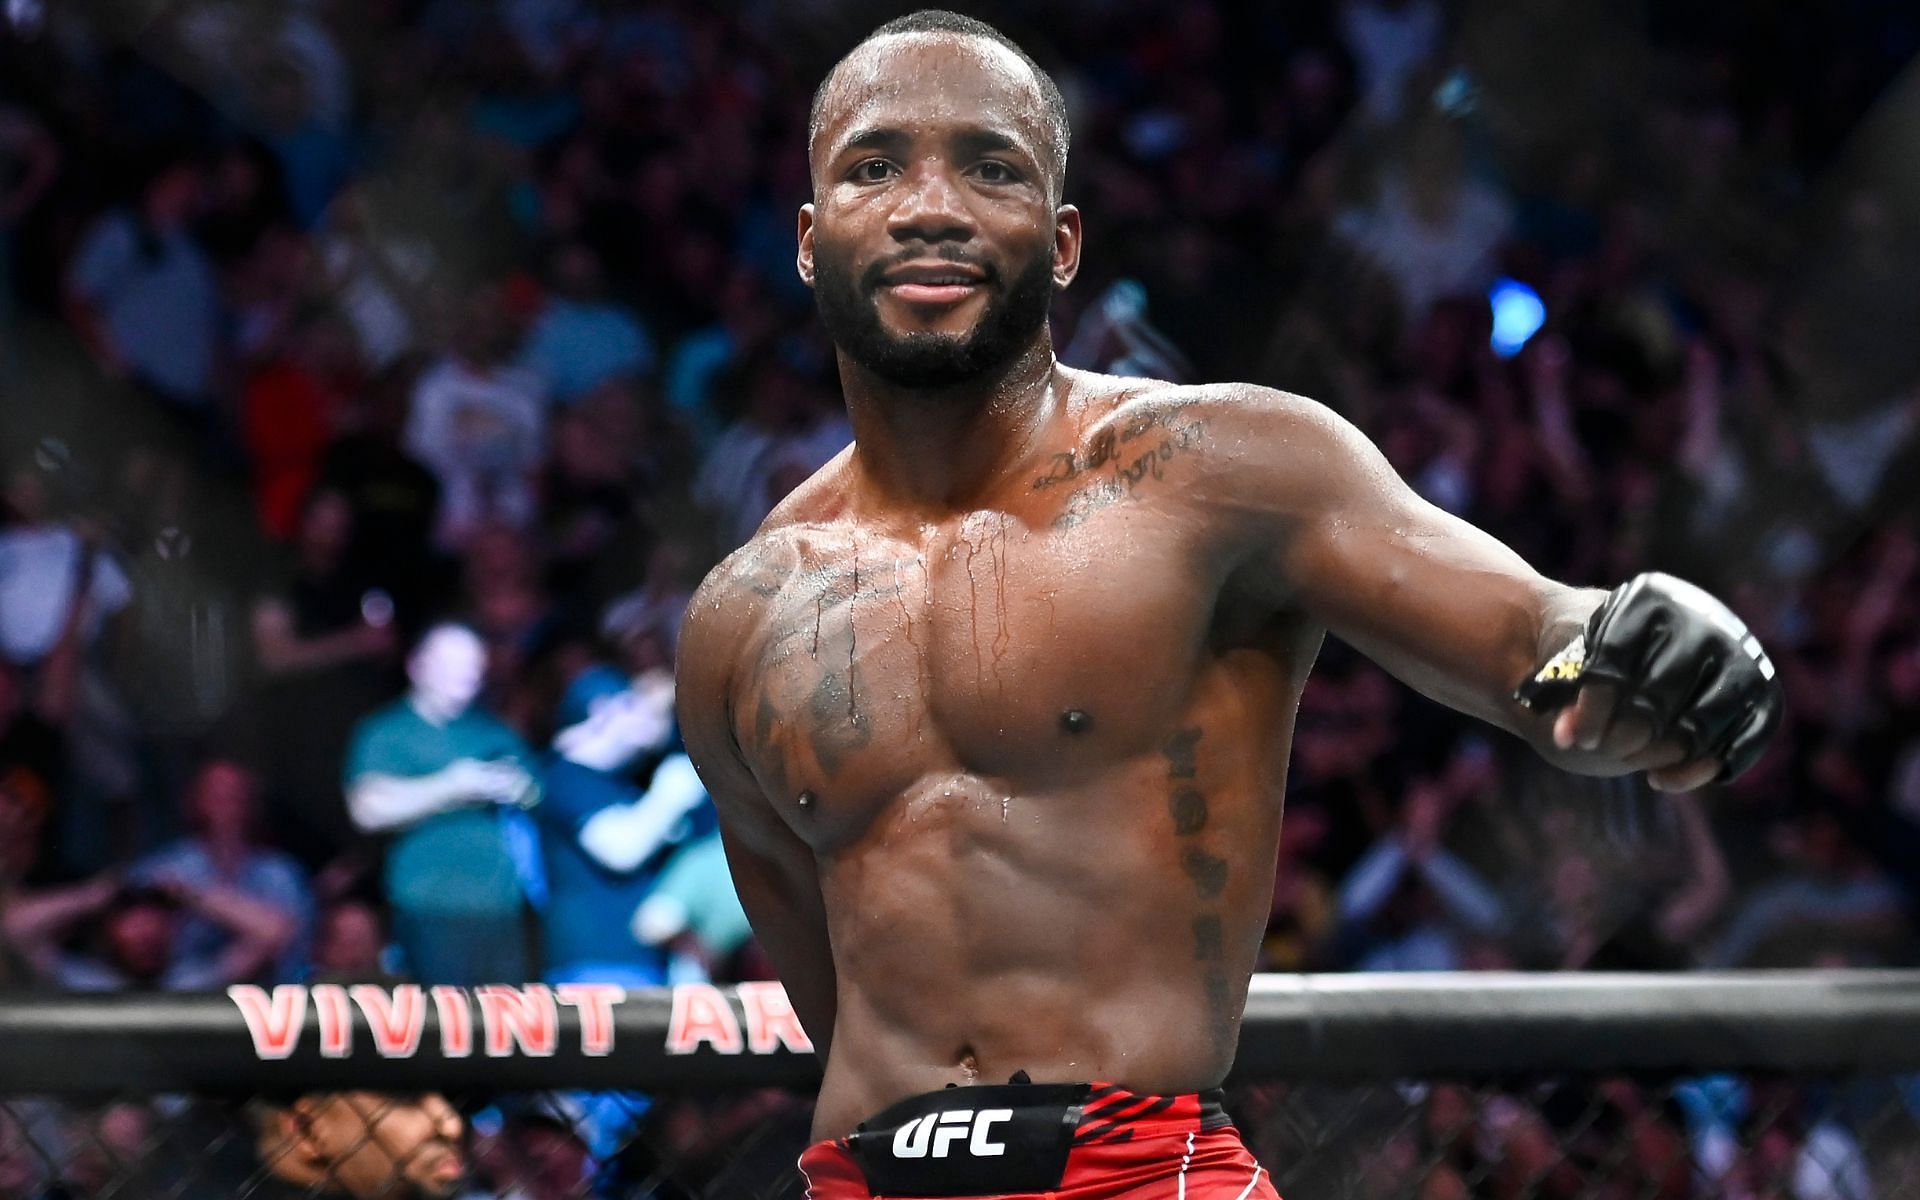 Is Leon Edwards the greatest British MMA fighter?